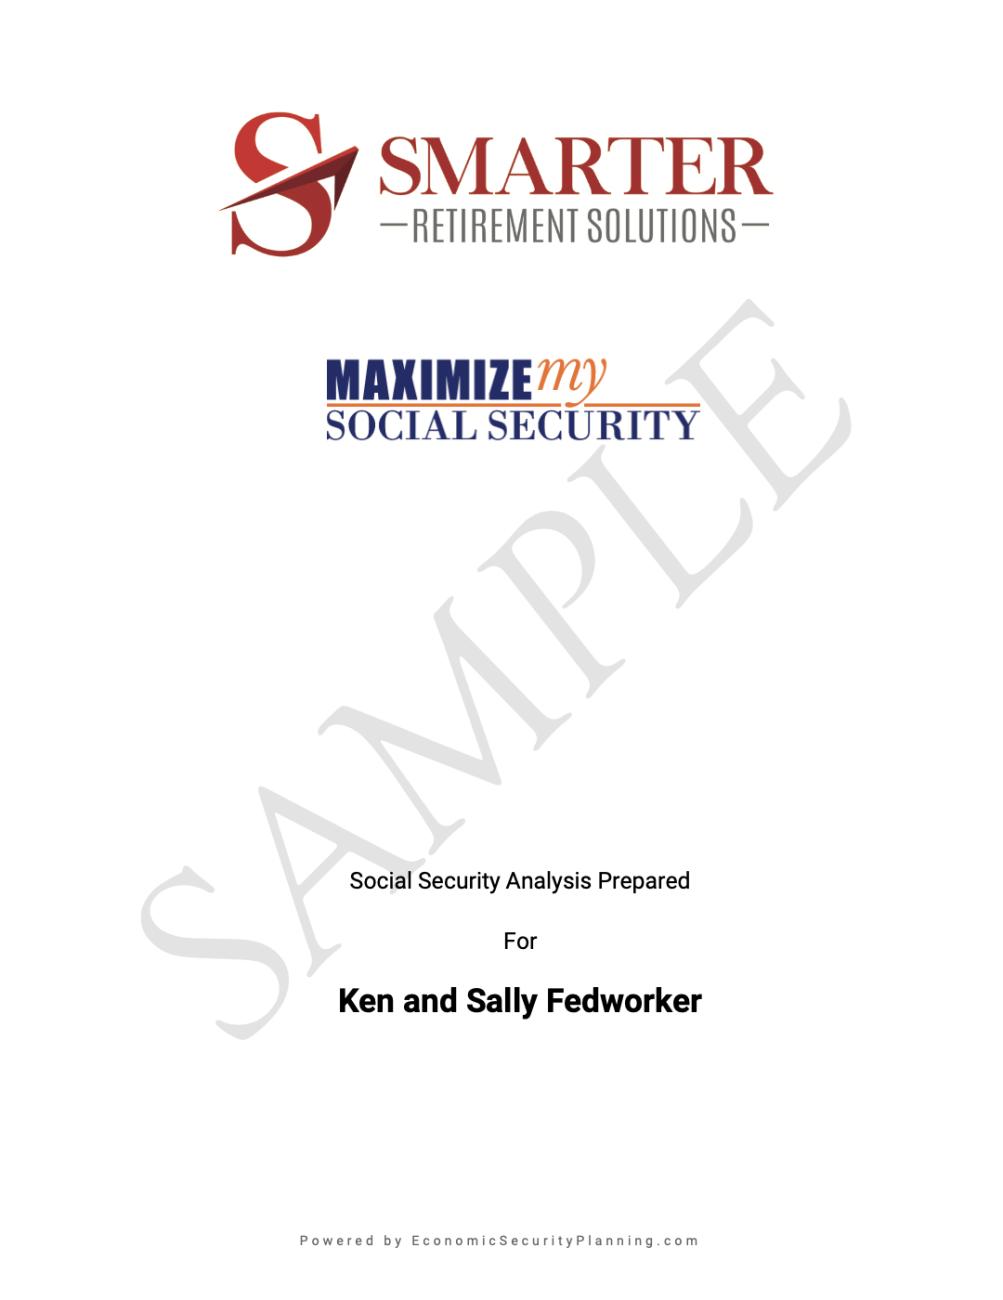 Your Social Security Analysis: Prepared for Ken and Sally (Fedworker)